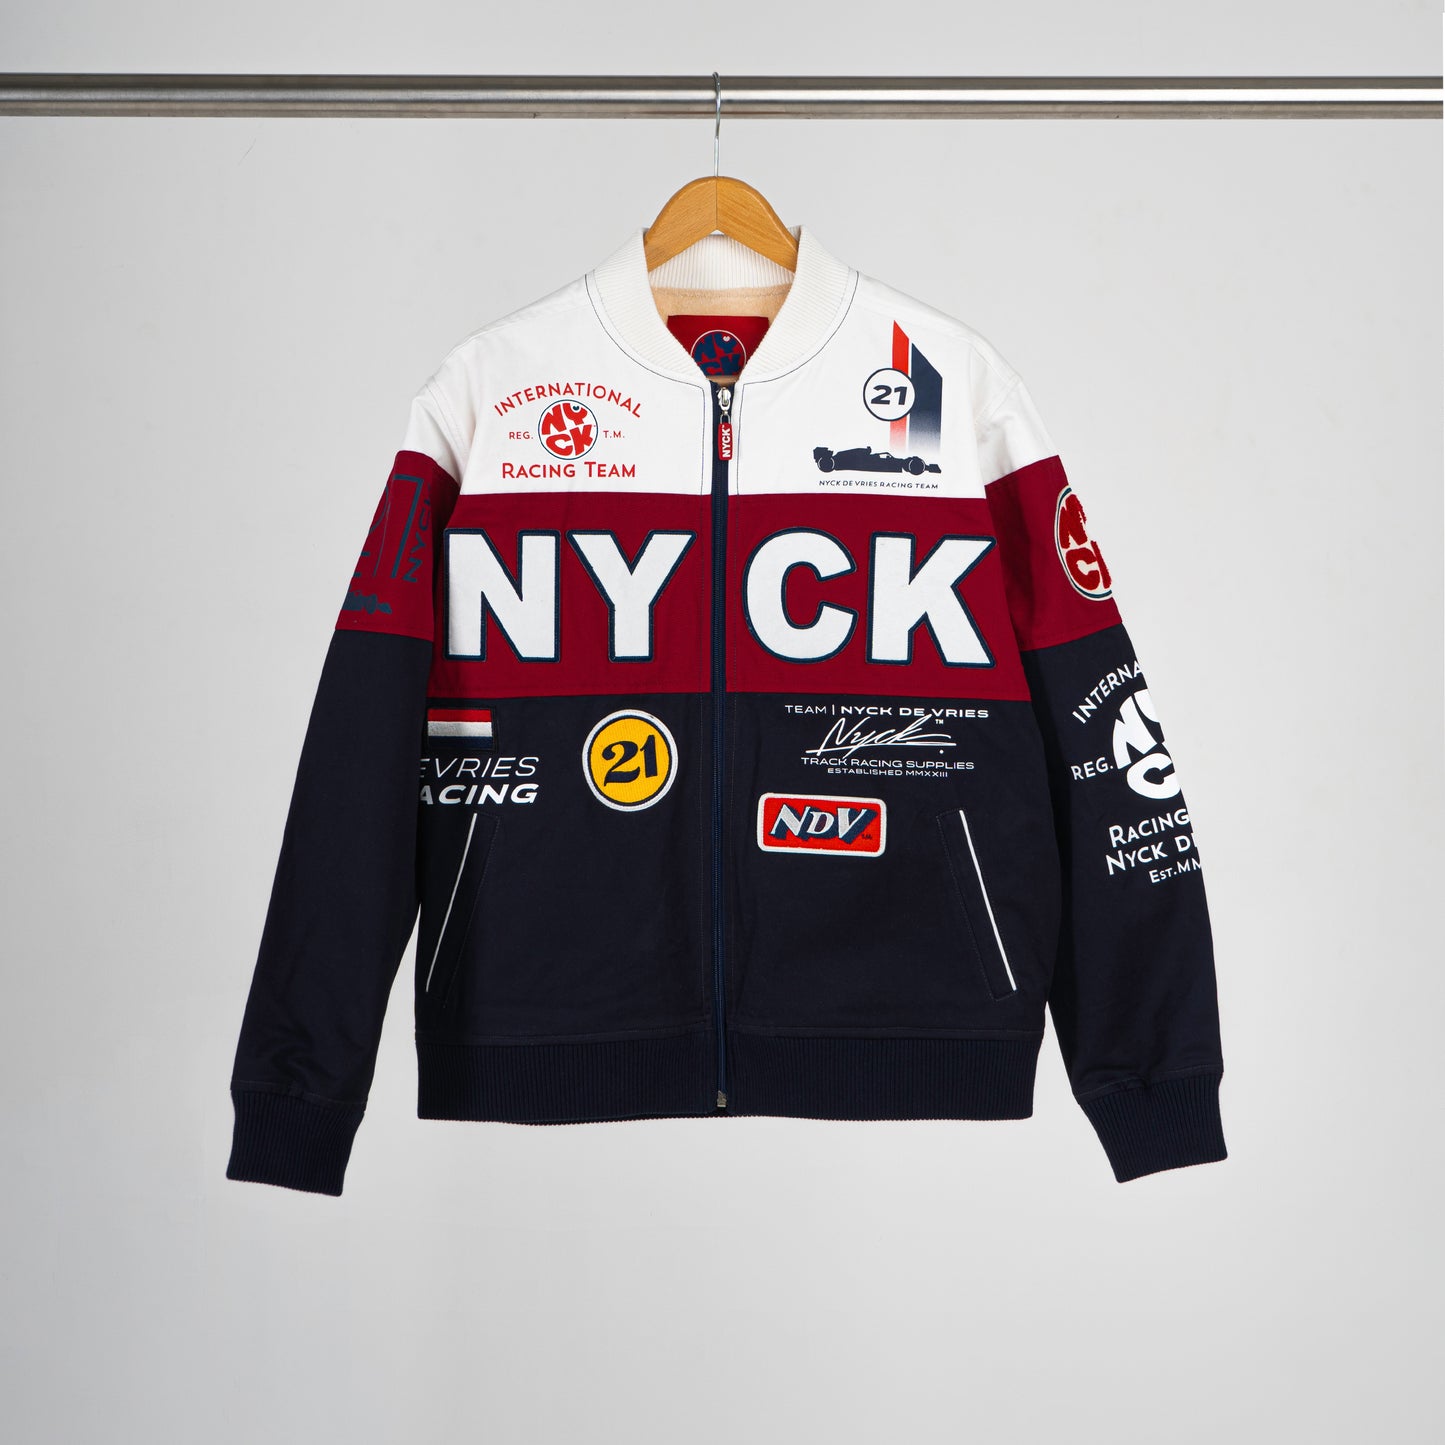 The official NYCK jacket